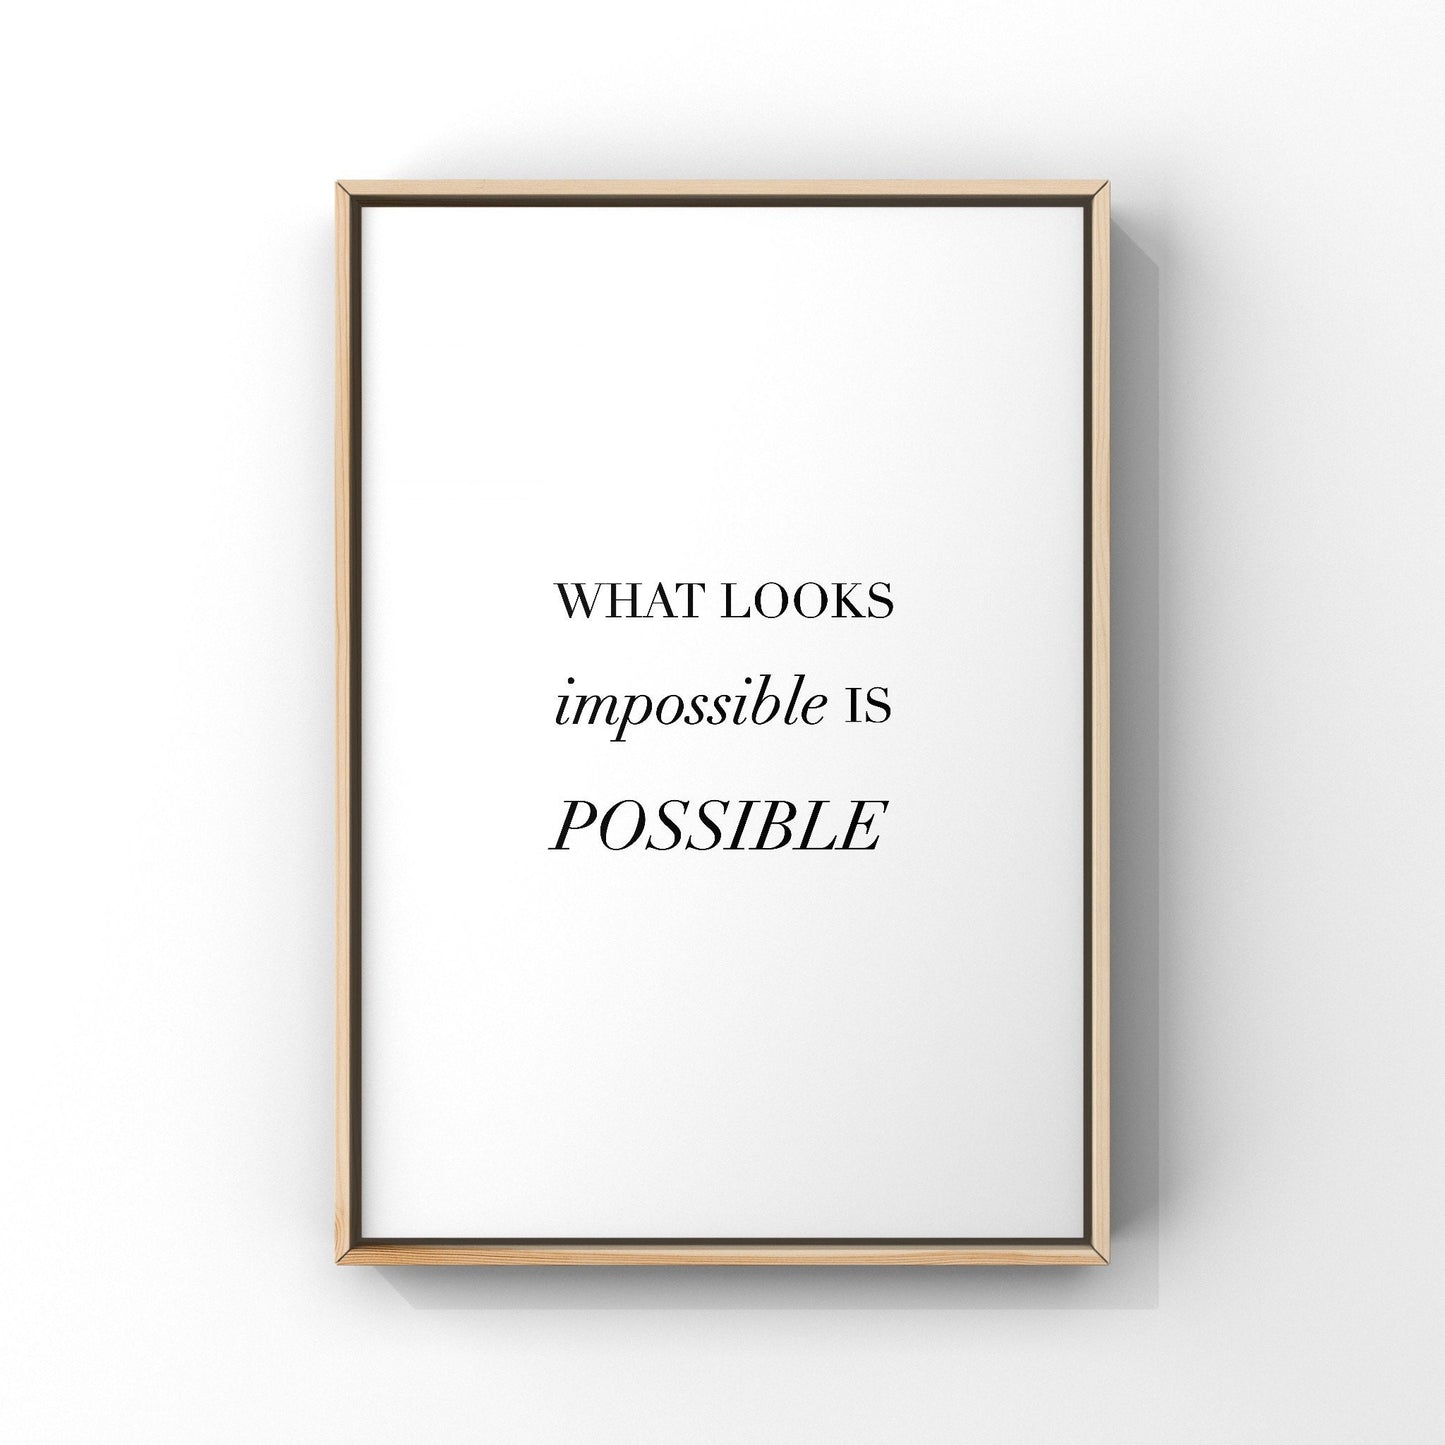 What looks impossible is possible,Inspirational wall art,Motivational quote print,Positive quote,Office wall art,Encouragement gift